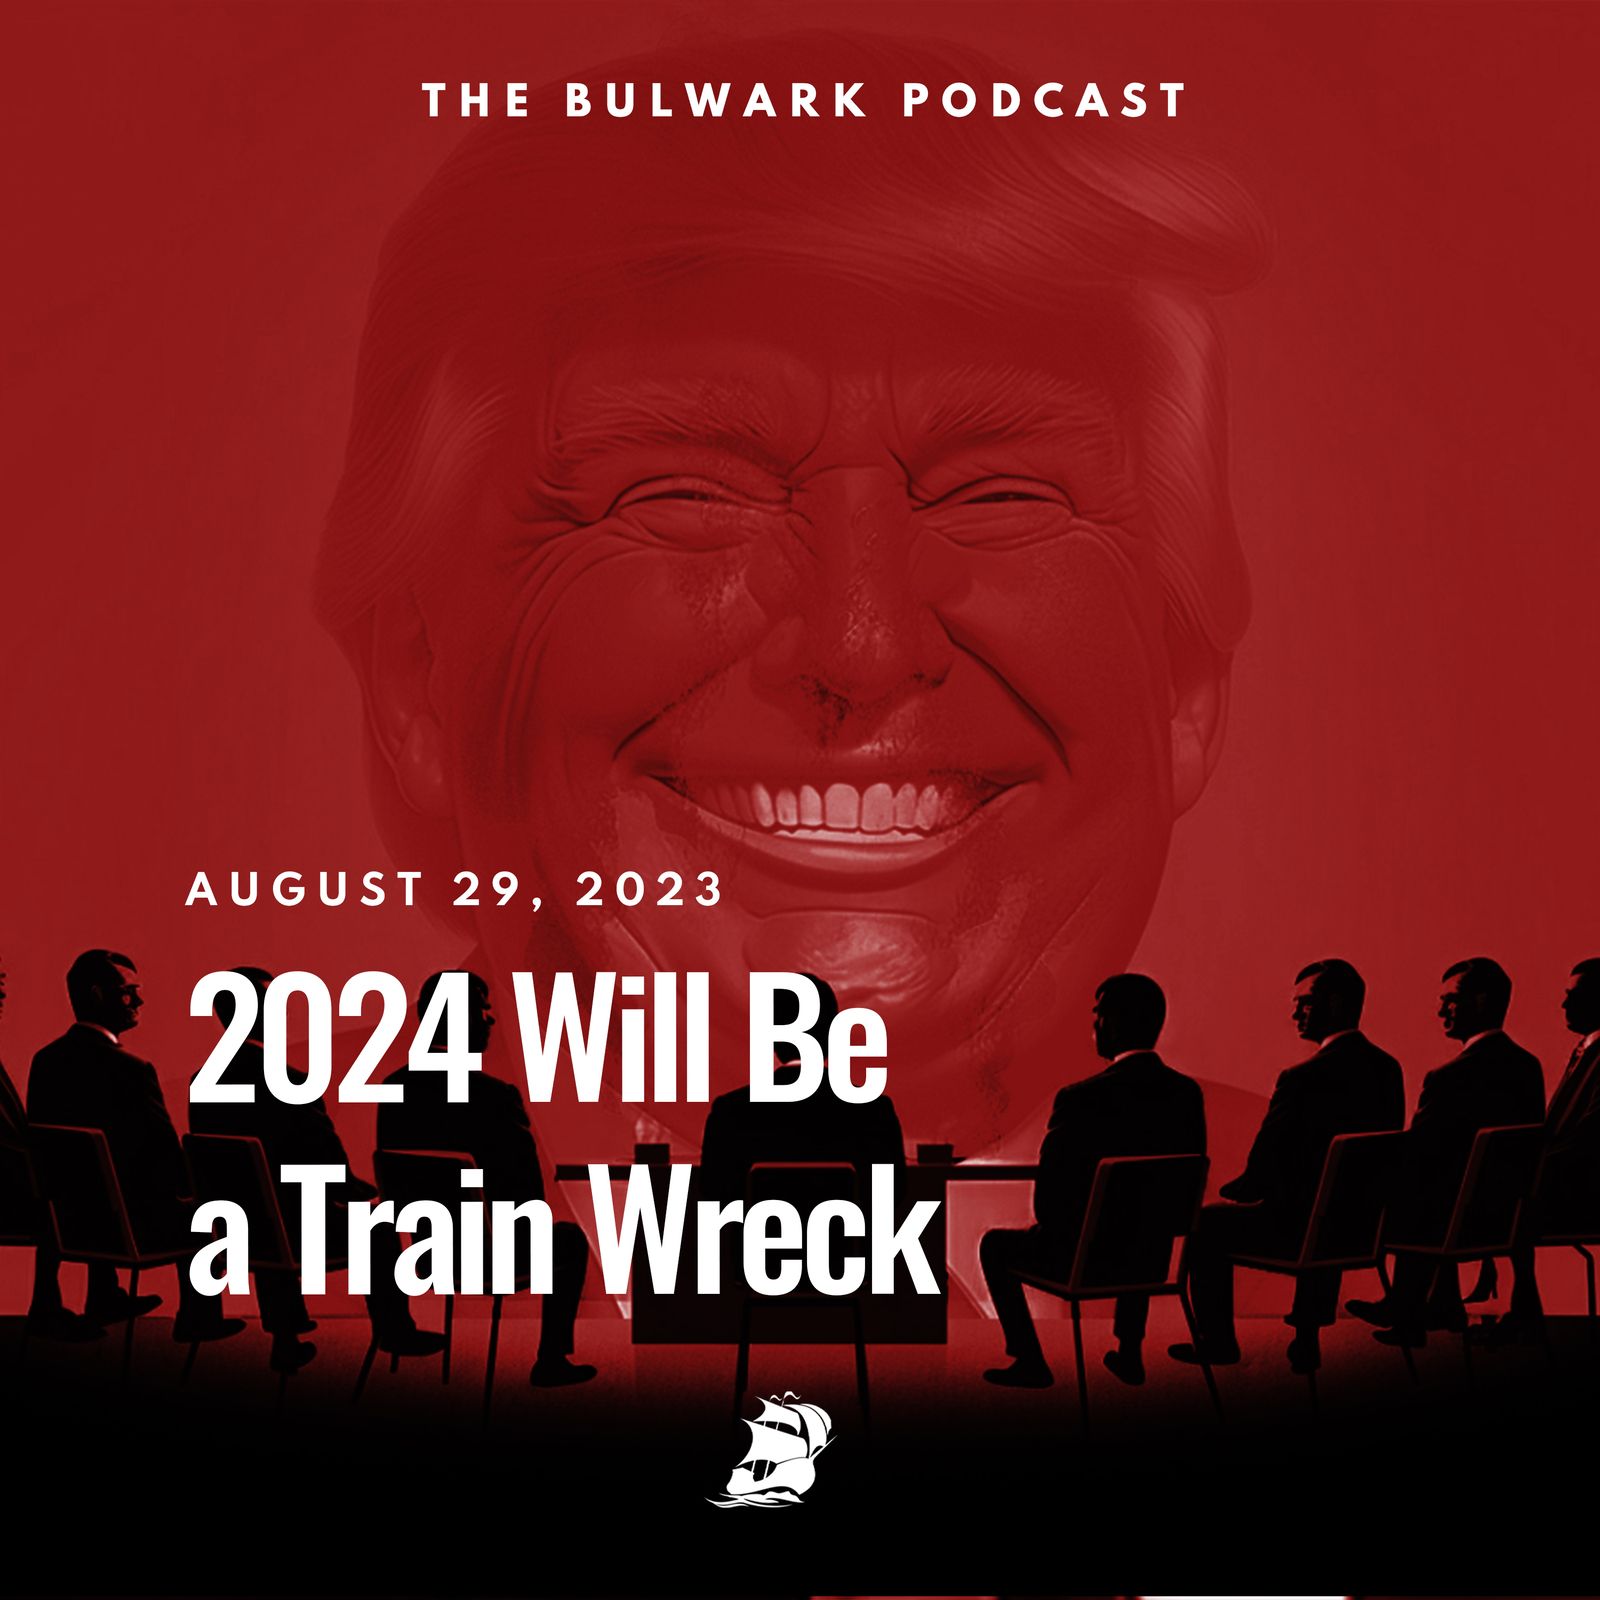 2024 Will Be a Train Wreck